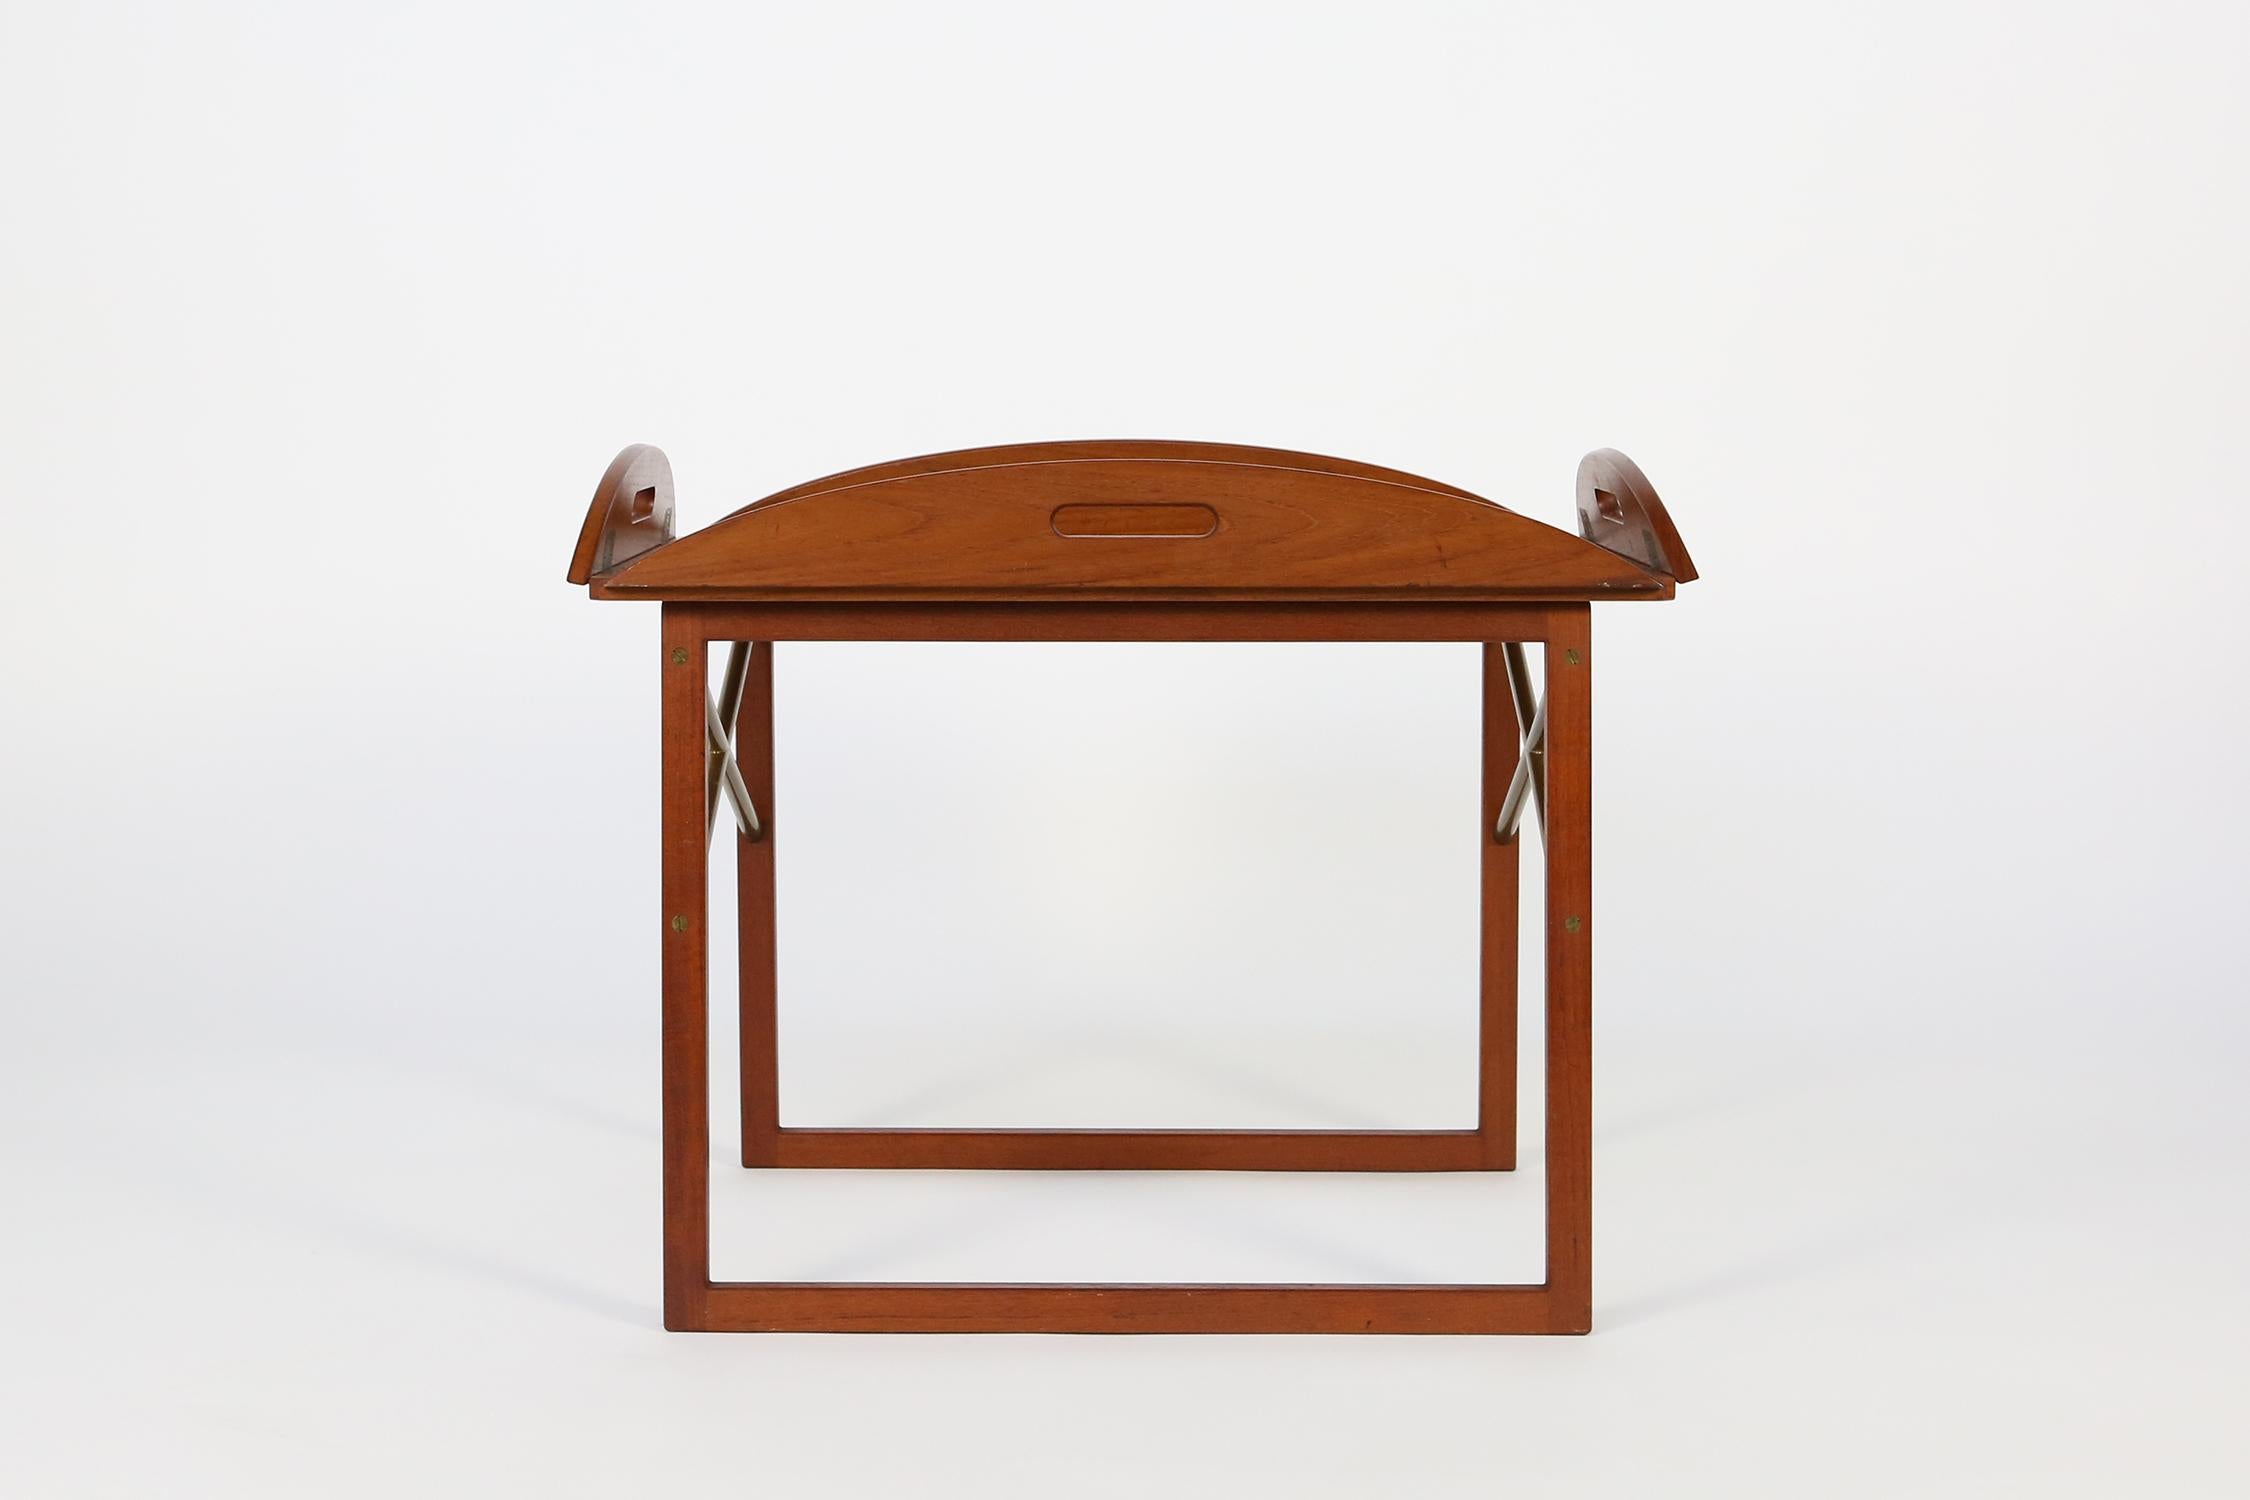 Teak side table with a removable rectangular top tray with hinged ends on an open frame base with brass cross stretchers.
Designed by Svend Langkilde for Illums Bolighus, circa 1960
Signed with metal manufacturer's label.